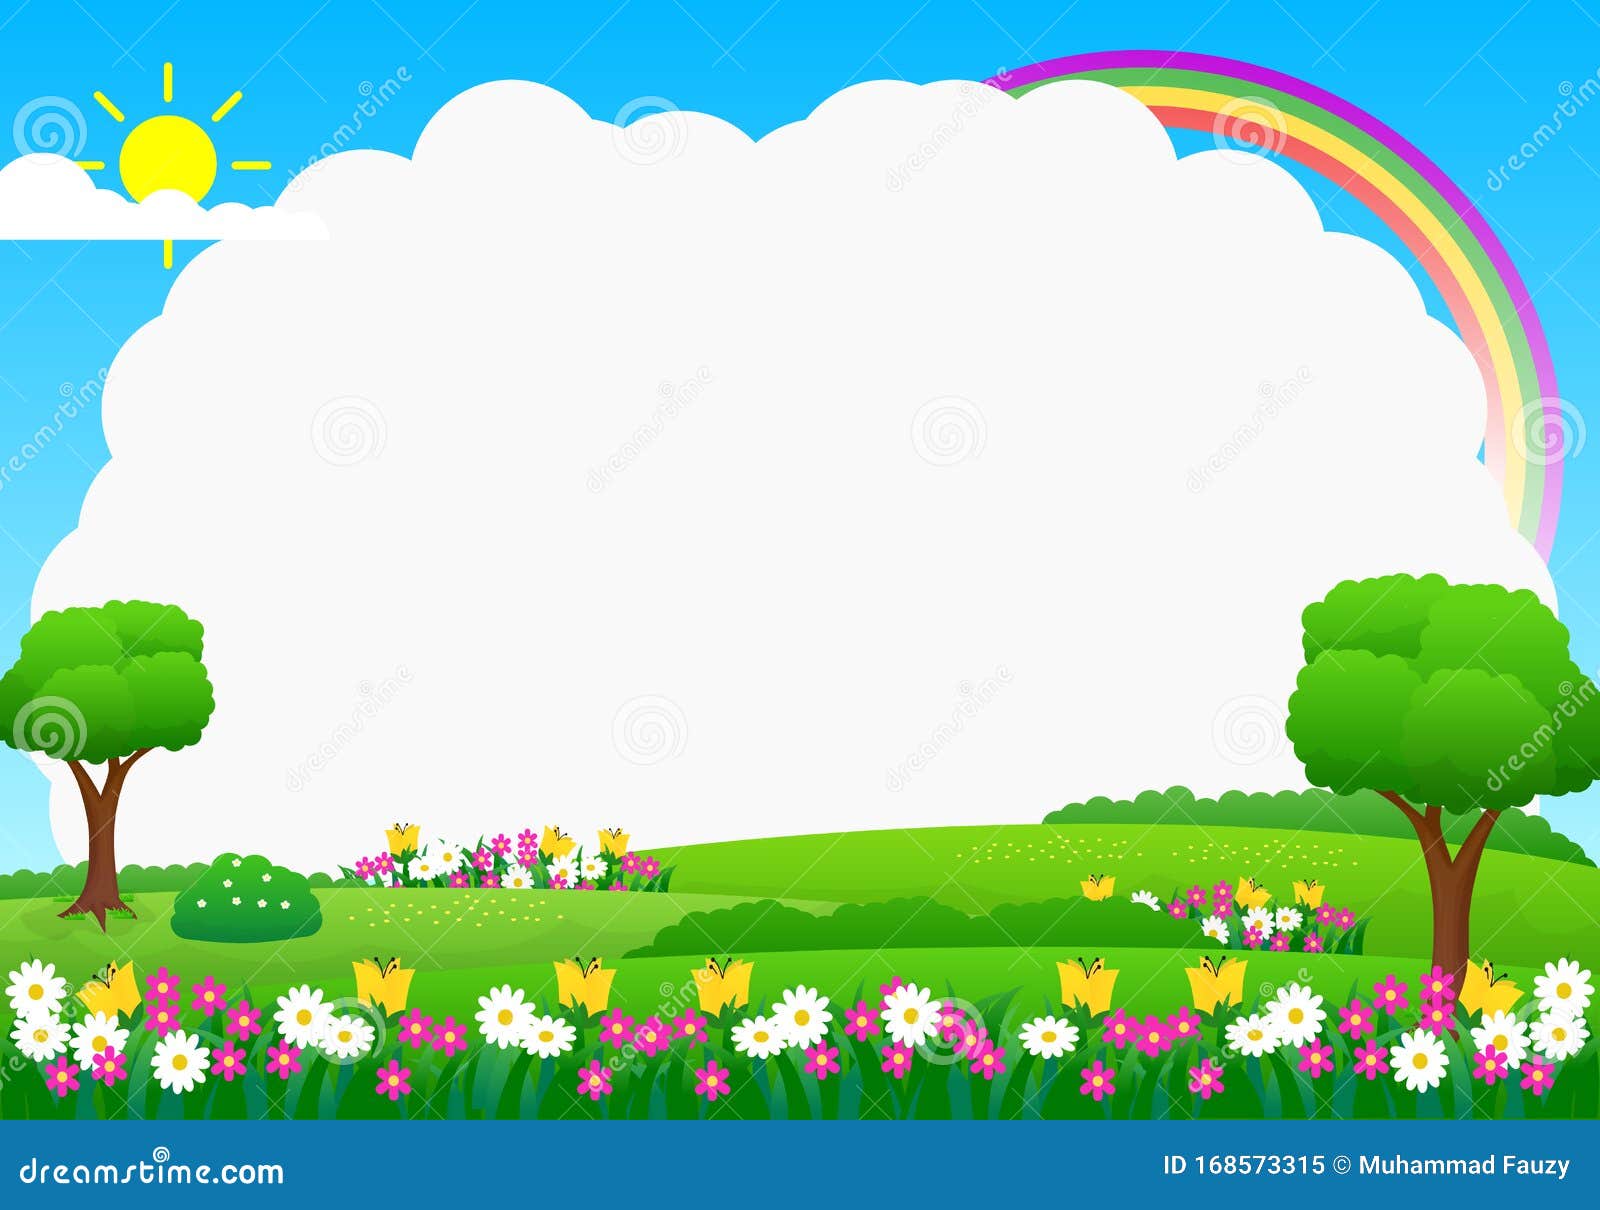 Nature Landscape Background with Funny Design Suitable for Kids Stock  Vector - Illustration of children, cheerful: 168573315